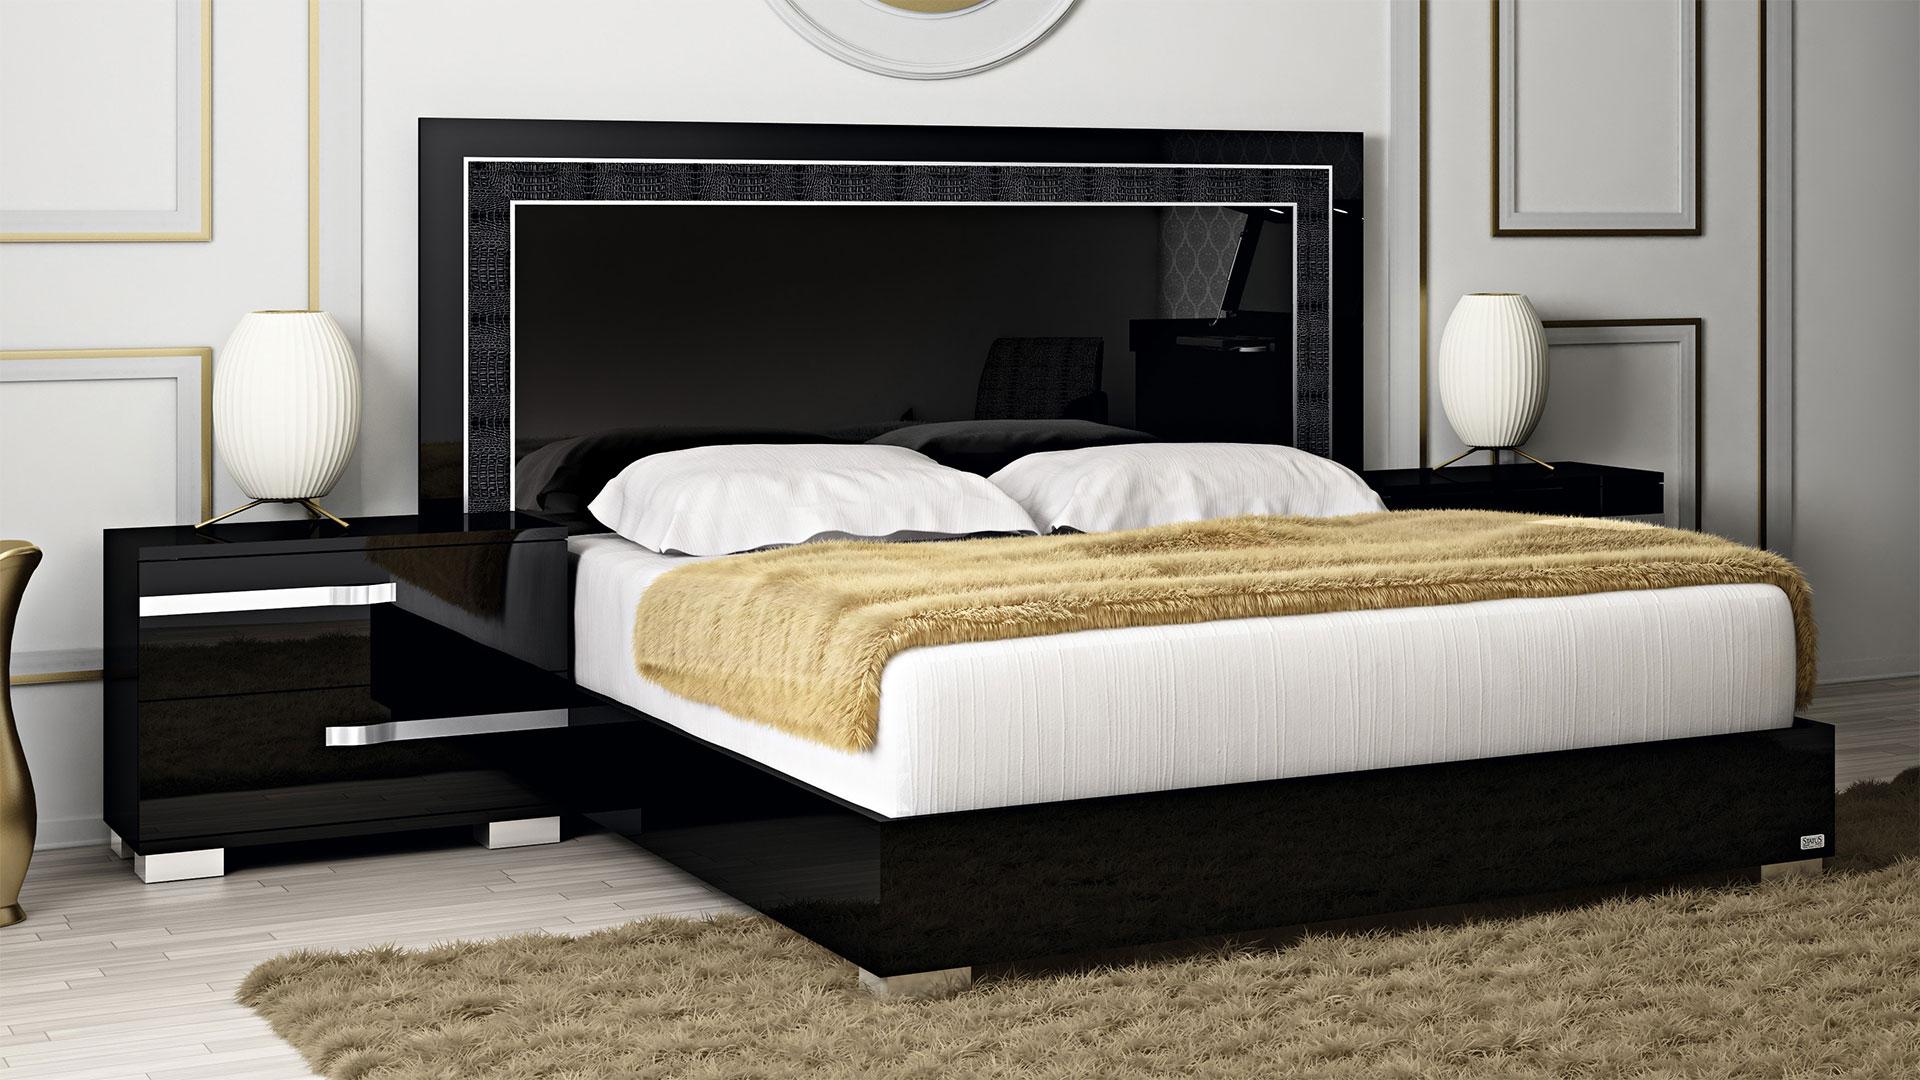 

    
At Home USA Volare Black High Gloss Lacquer King Bed Contemporary Made in Italy
